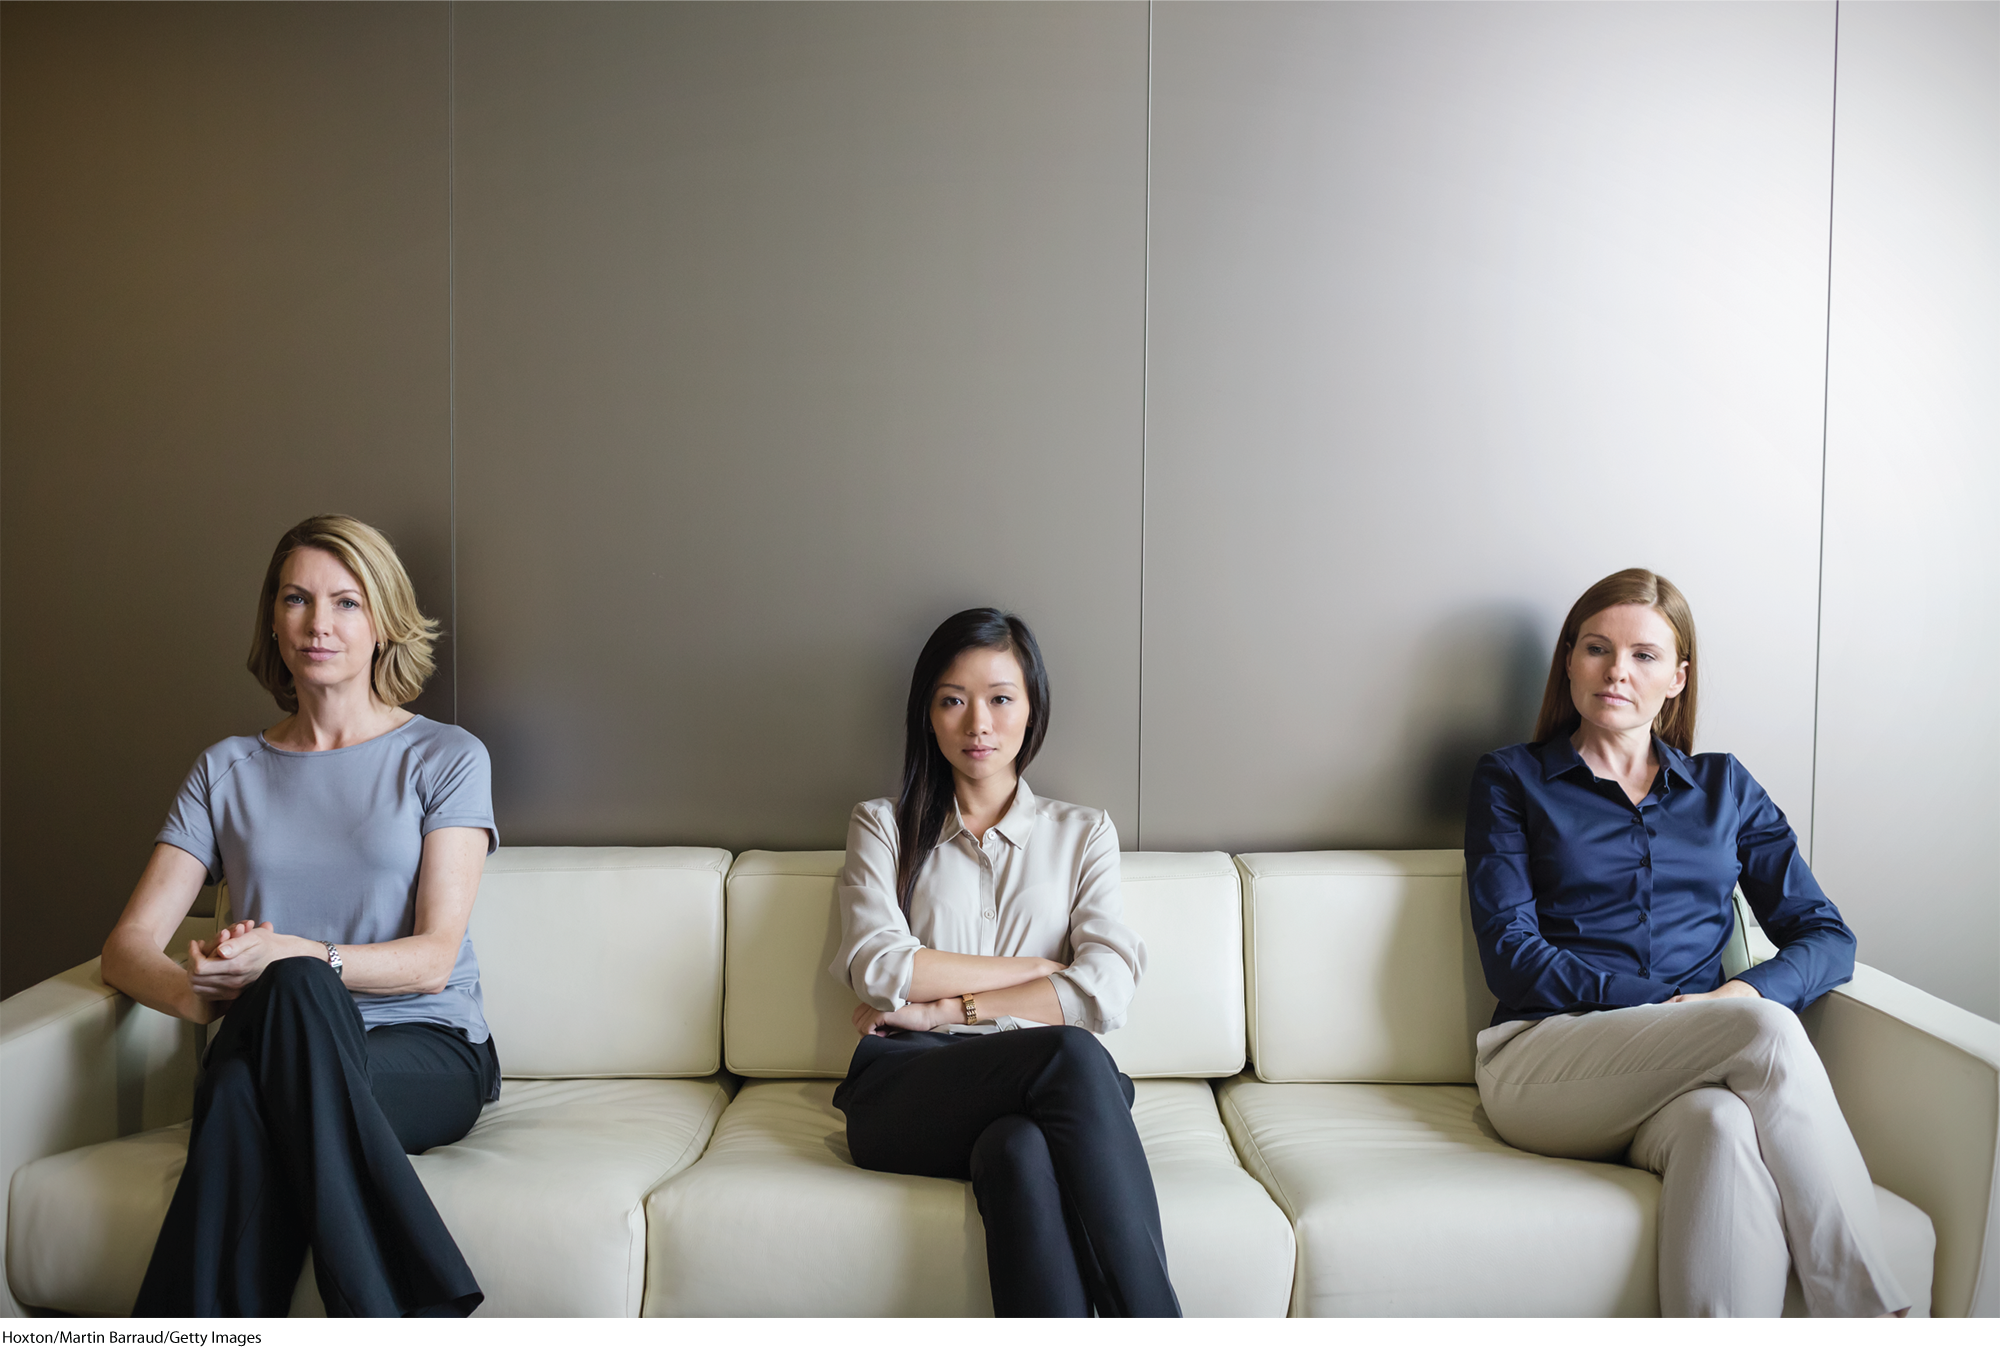 A photo shows three young women sitting on a couch. They are sitting at a distance from each other.